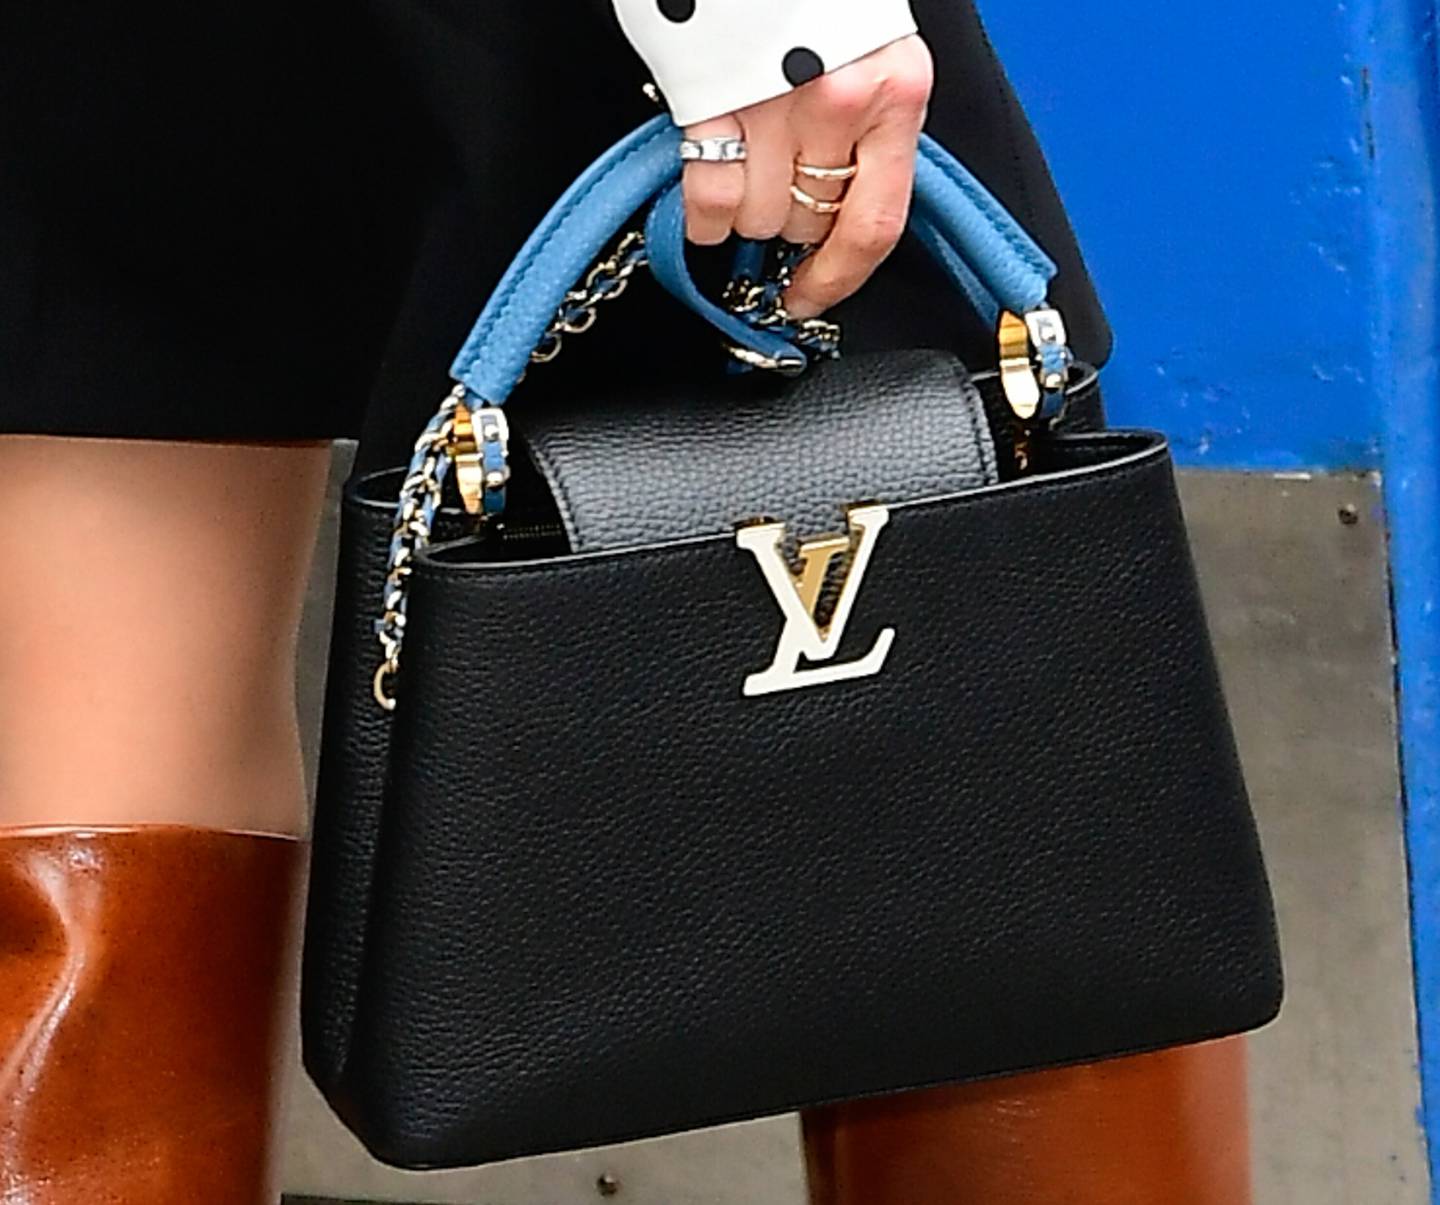 Jennifer Connelly showing off a Louis Vuitton bag at a television appearance in May 2022 on the promotion tour for "Top Gun: Maverick."